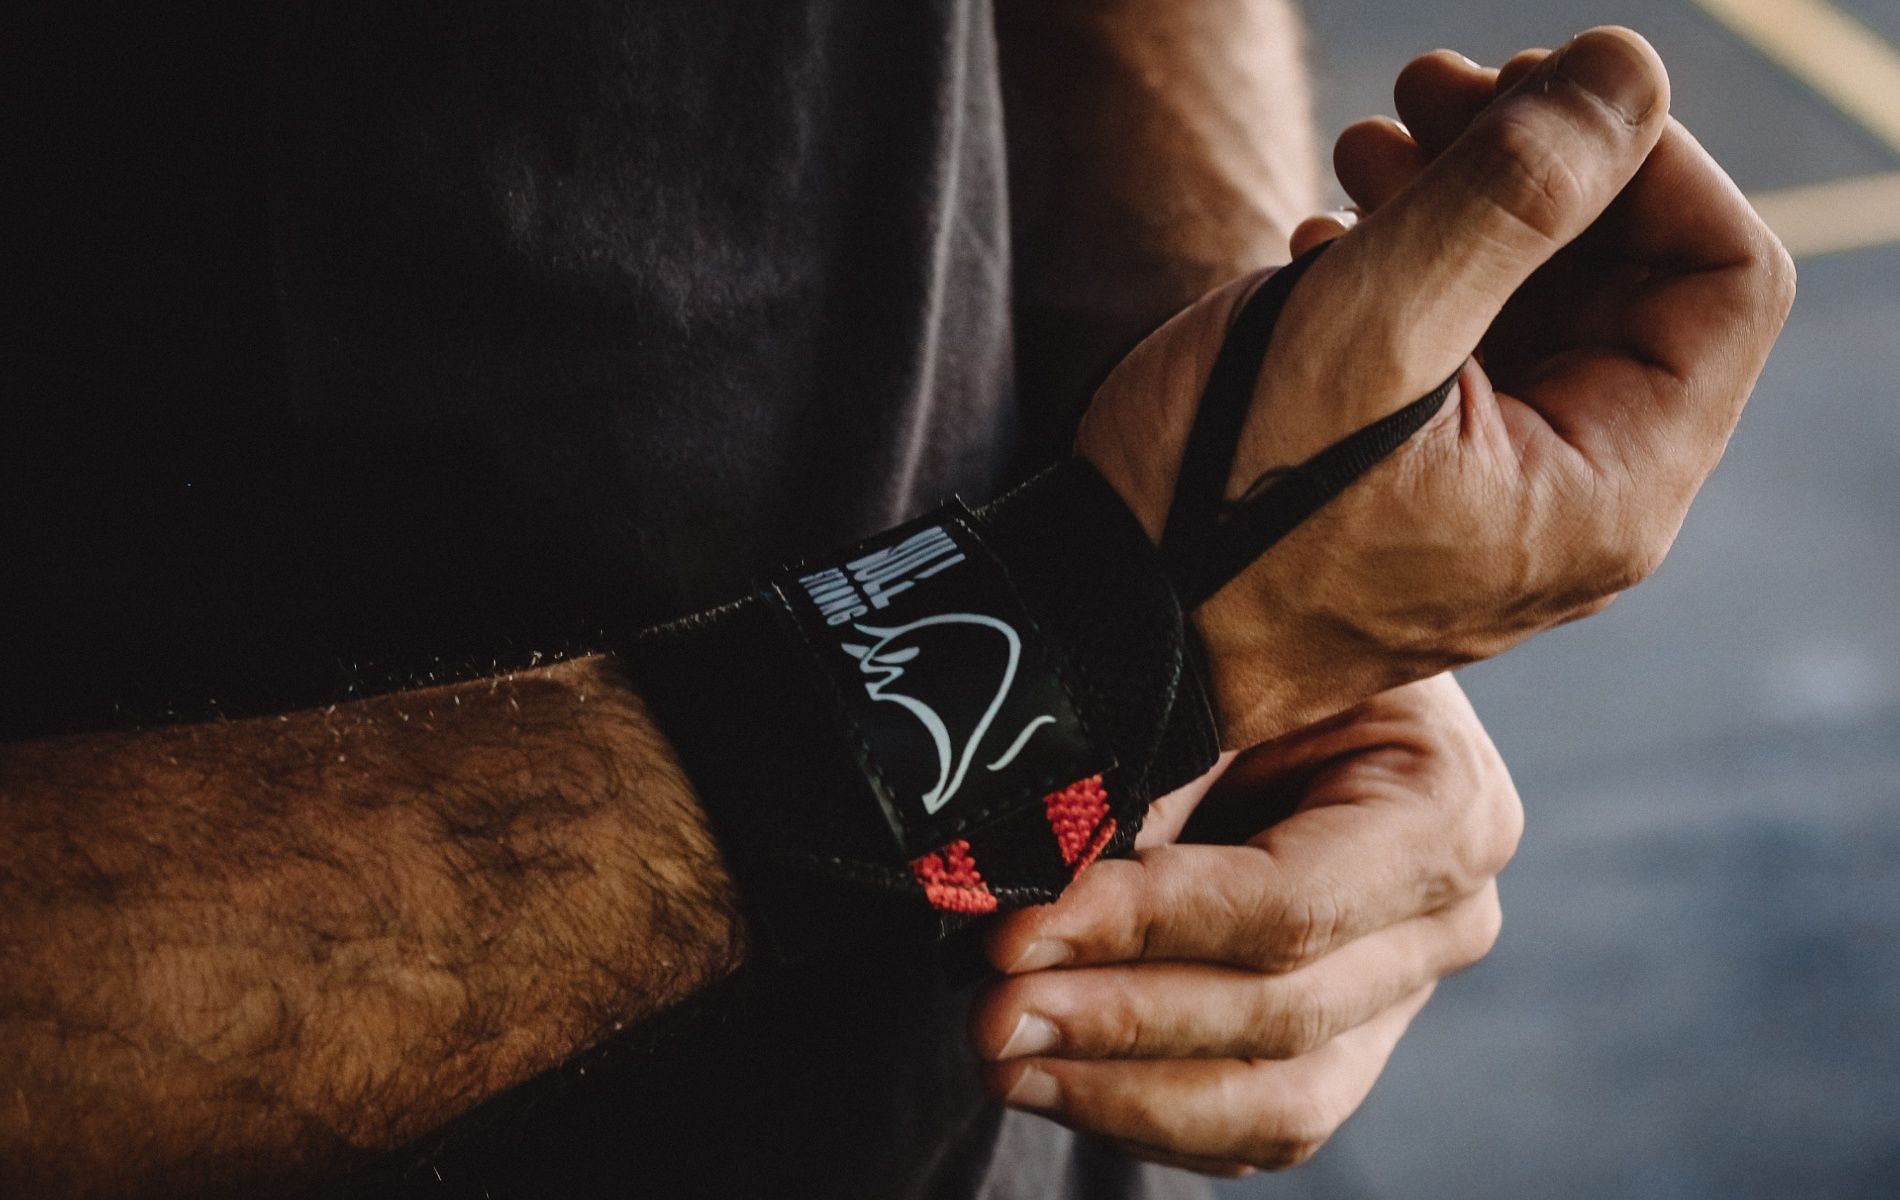 This workout improves grip strength by activating the muscles of the forearm. (Image by Geancarlo Peruzzolo via Pexels)